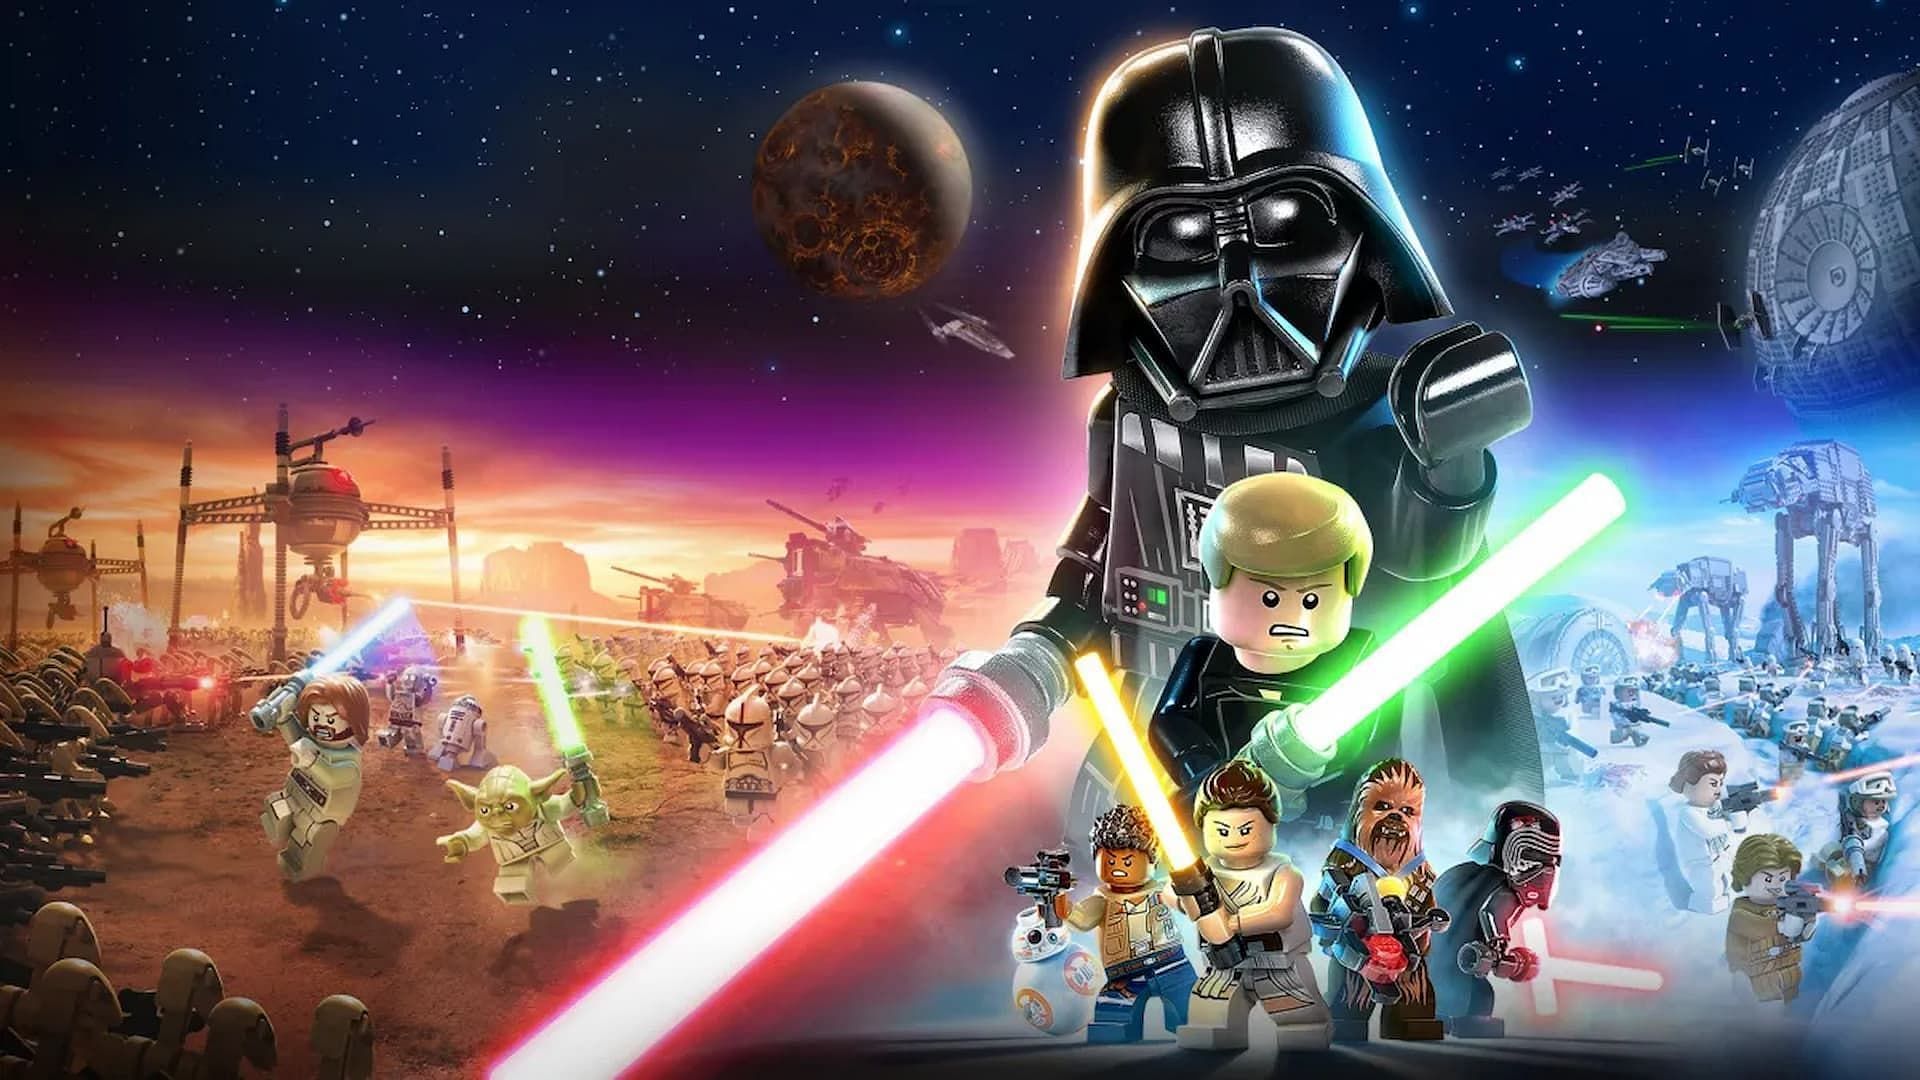 LEGO Star Wars: The Skywalker Saga is coming to Game Pass in December (Image via Warner Bros. Interactive Entertainment)